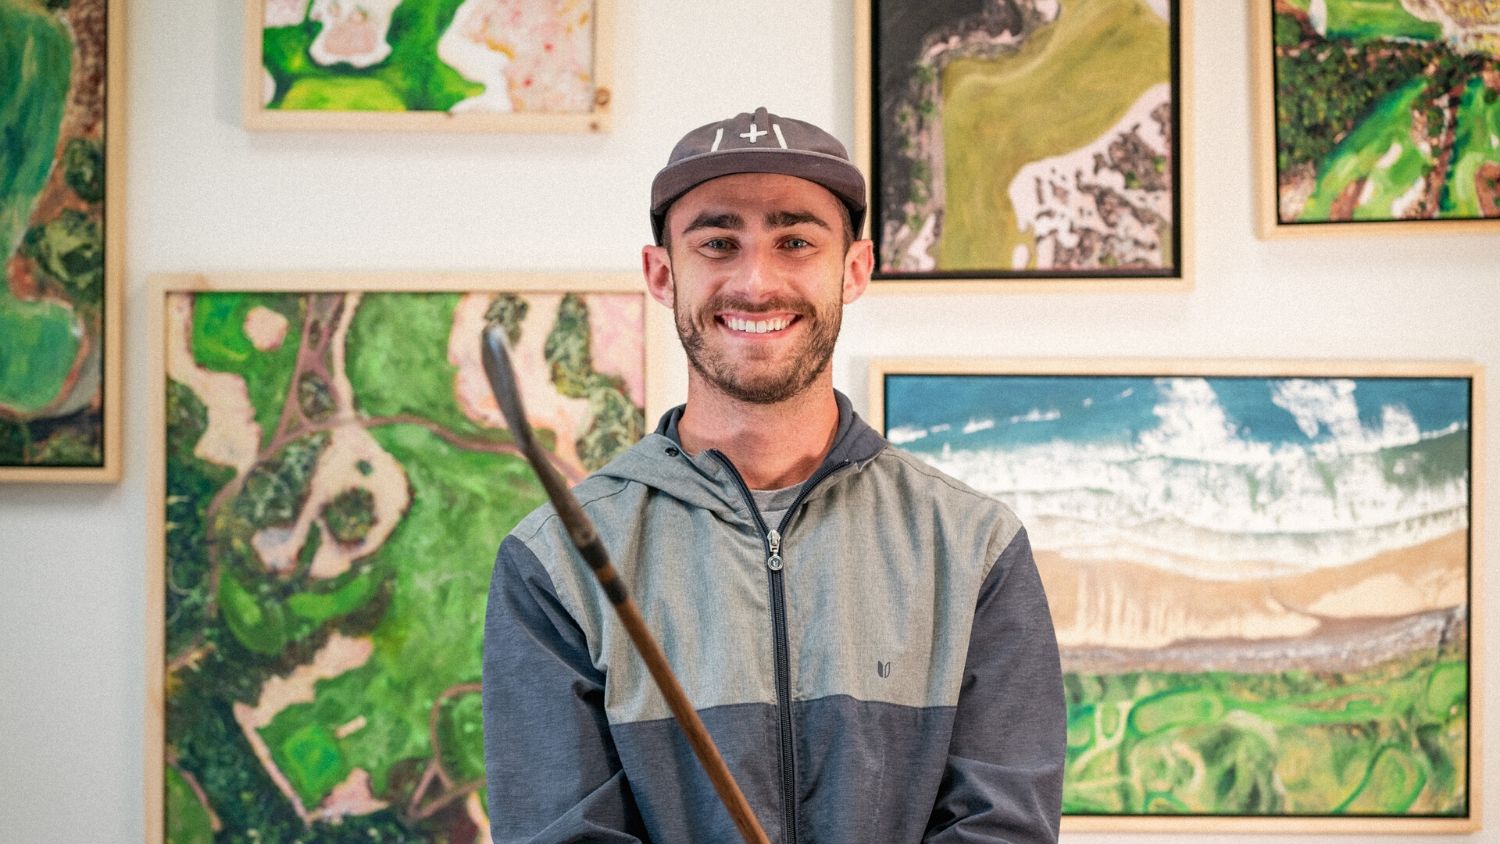 Luke Davis feature - Tee Time: A Conservation With a Golf Entrepreneur and Designer - College of Natural Resources News NC State University